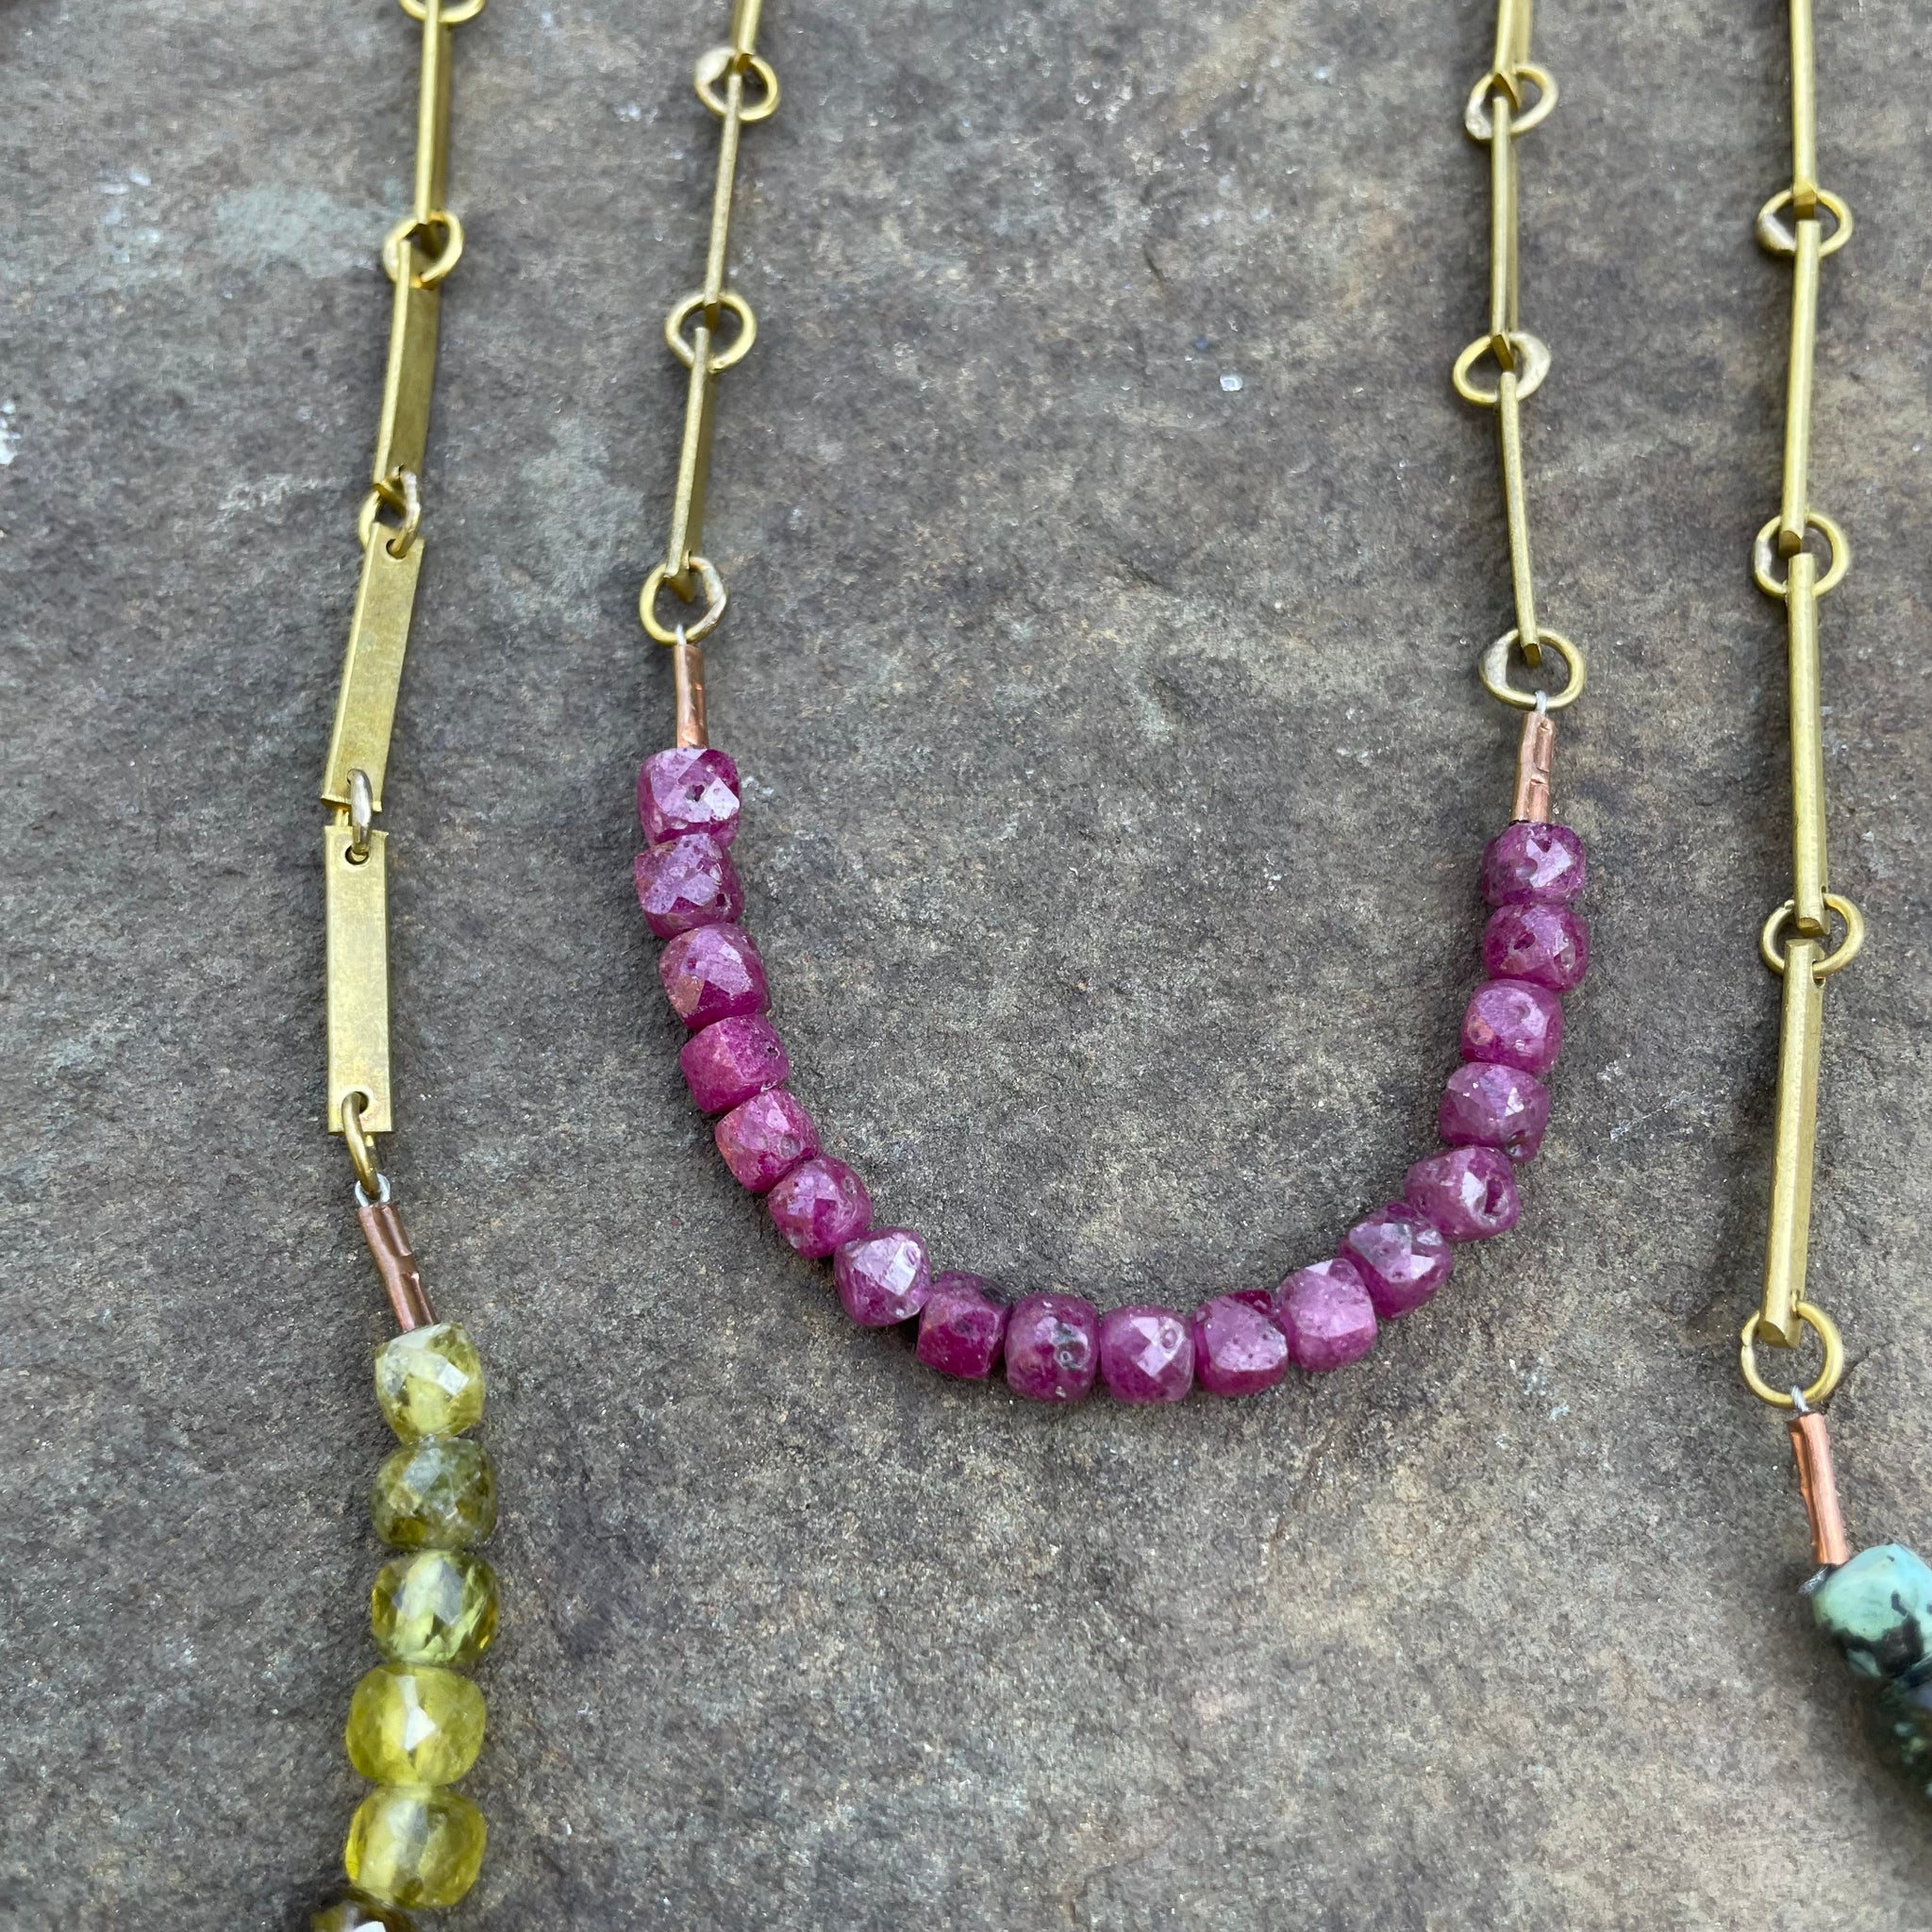 Handmade Flat Bar Brass Chain and Cubed Stone Necklace by Eric Silva